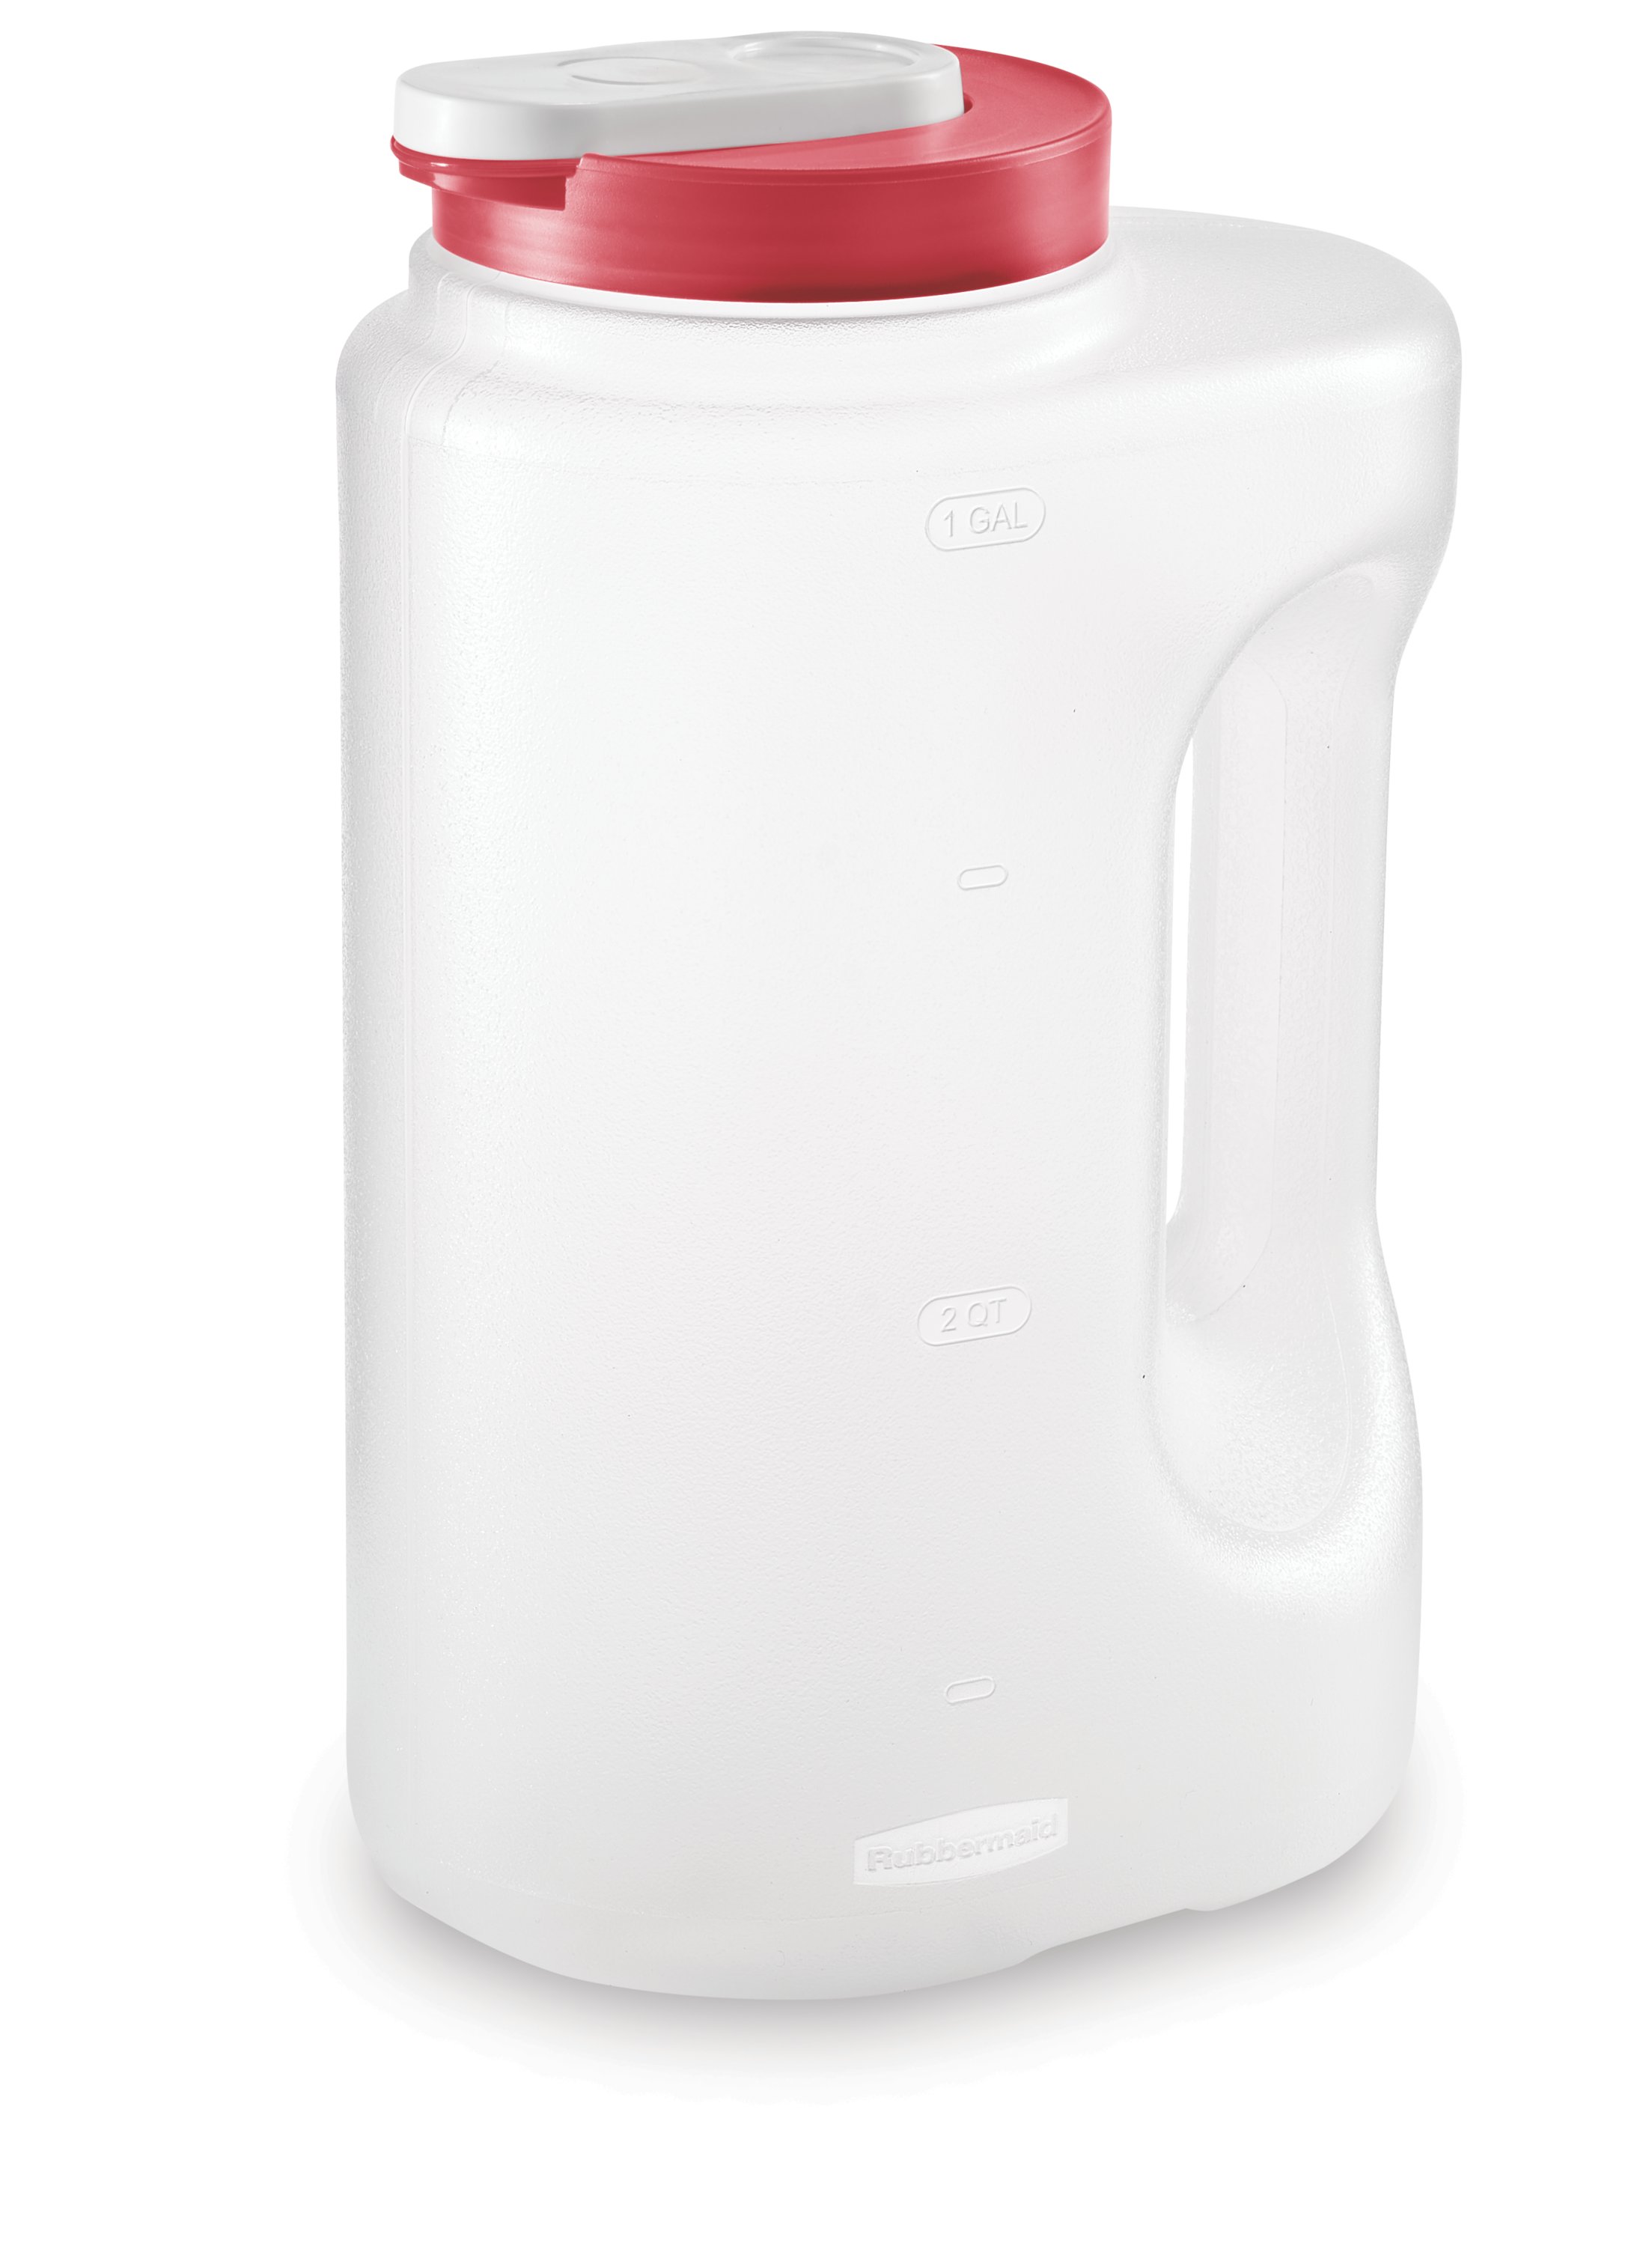 NEW! Rubbermaid Leak-Proof Beverage Containers - Outnumbered 3 to 1